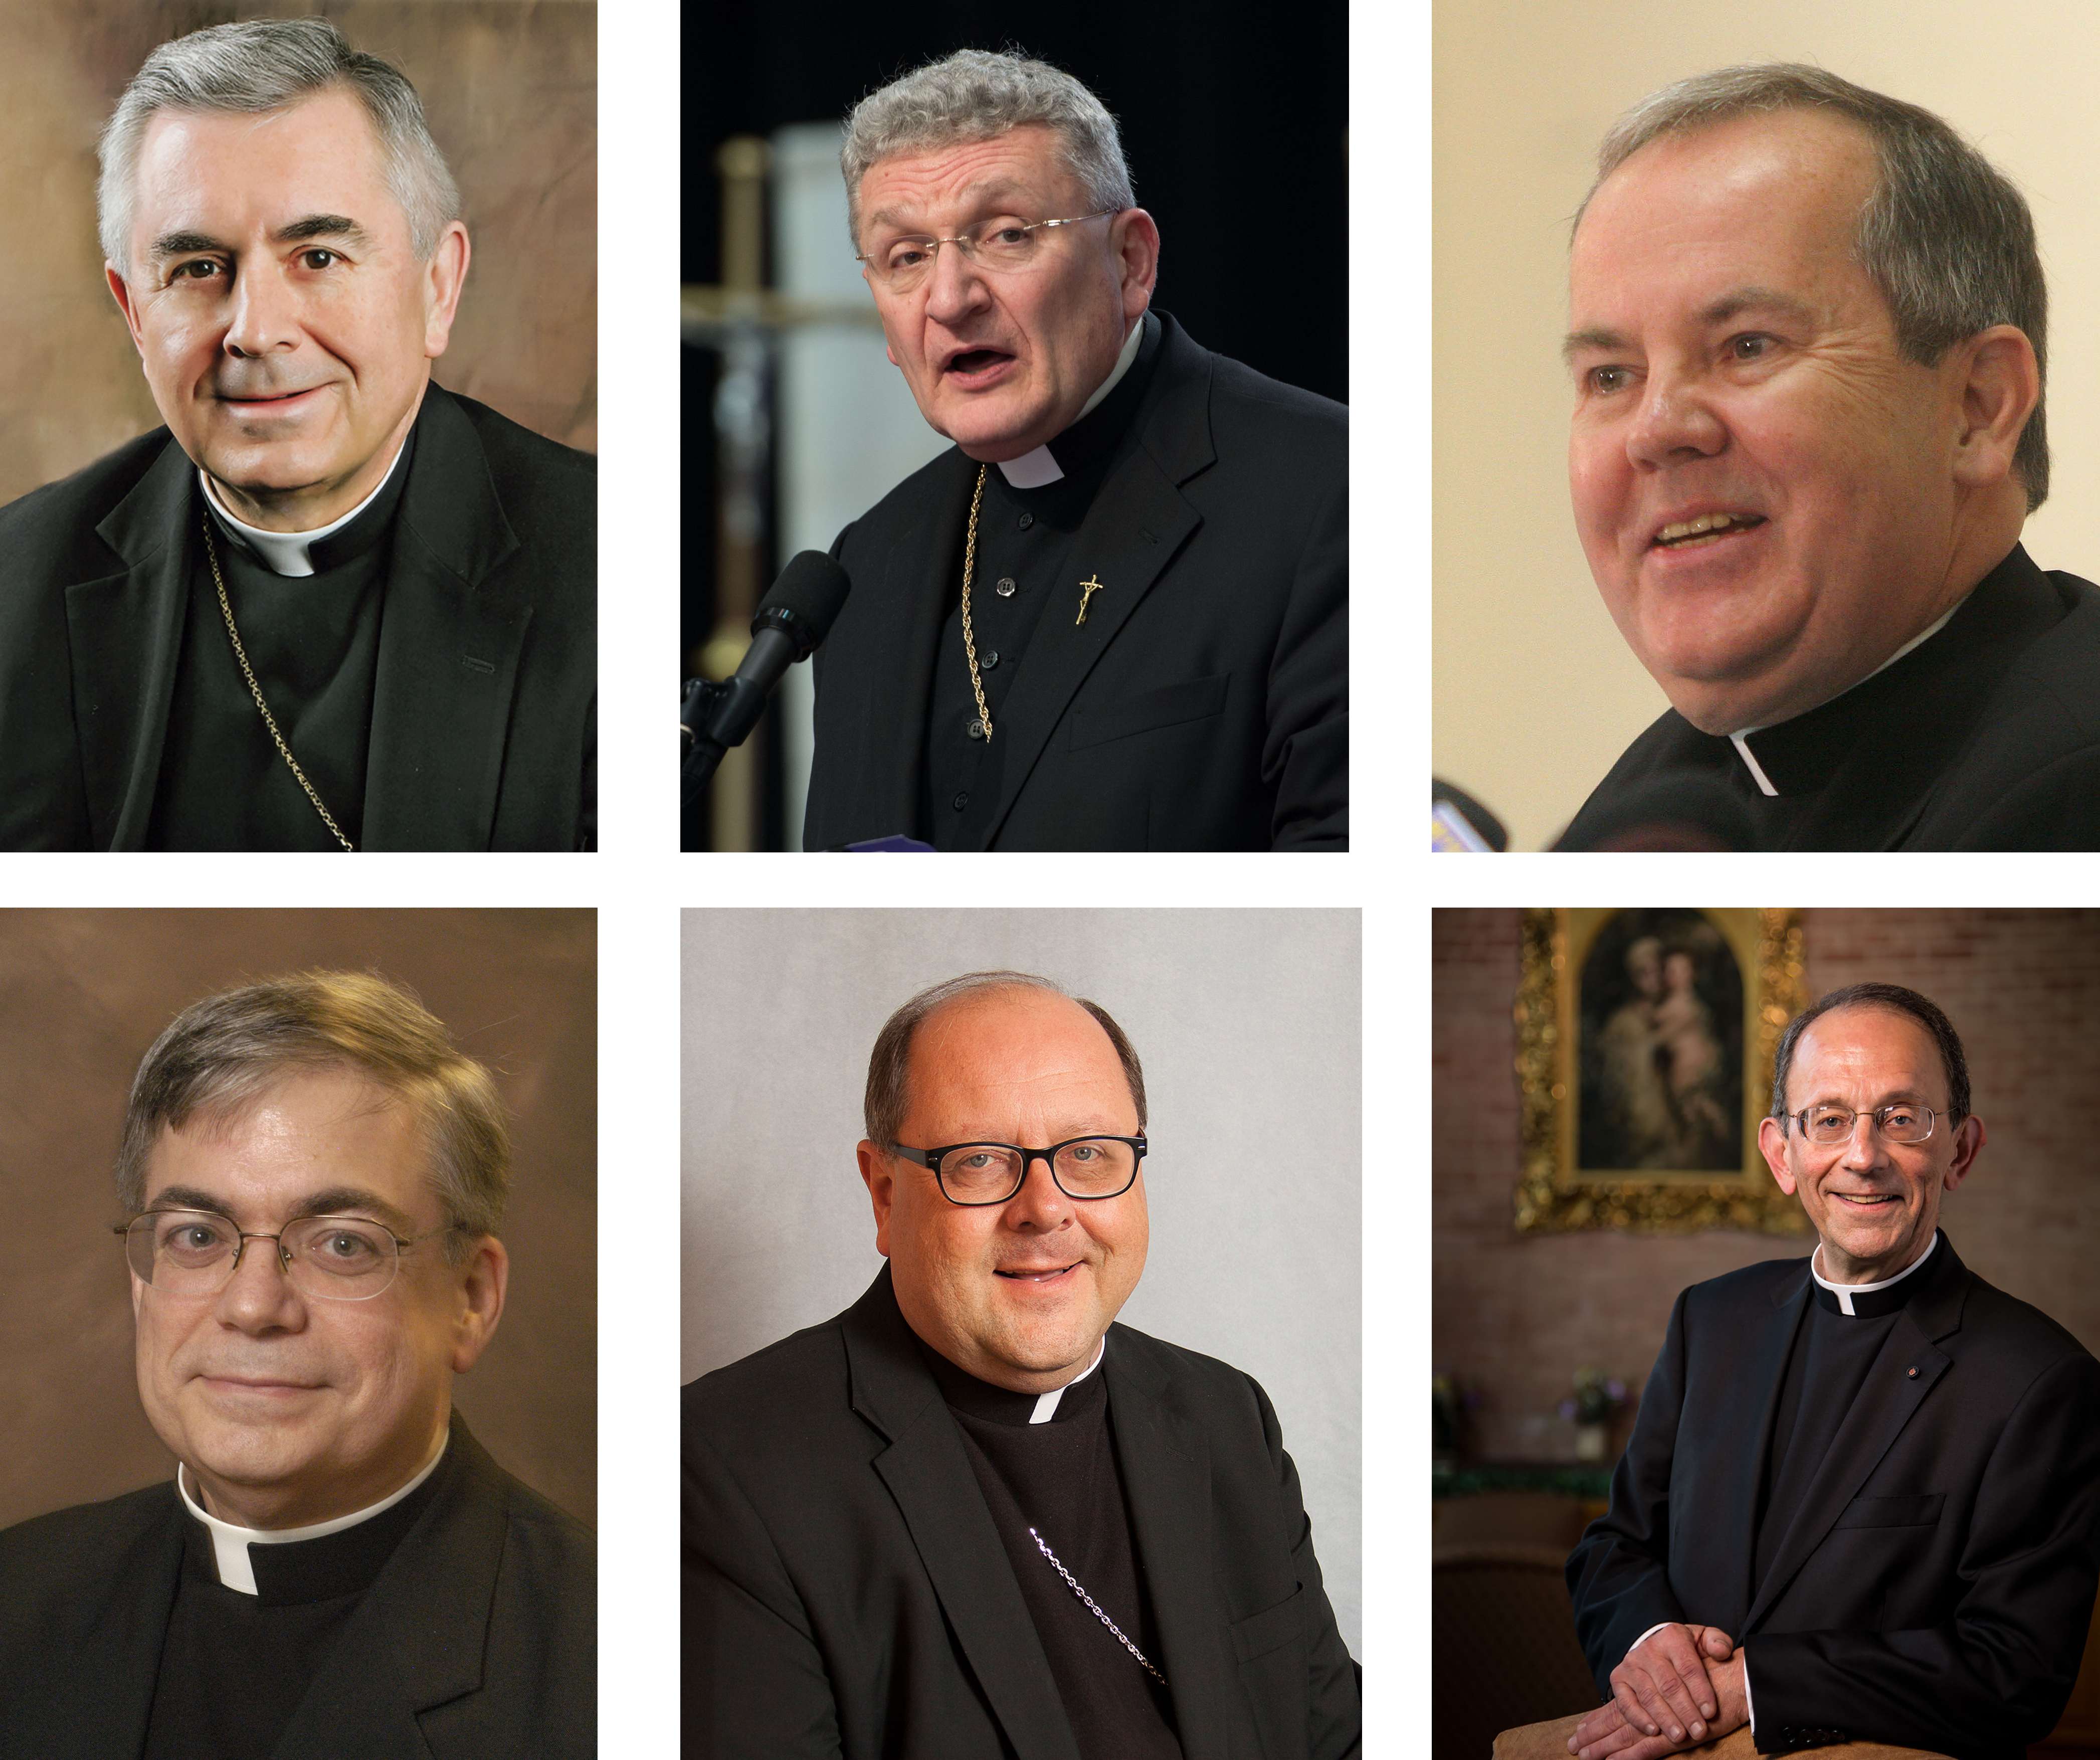 Statements from bishops of dioceses named in grand jury abuse report